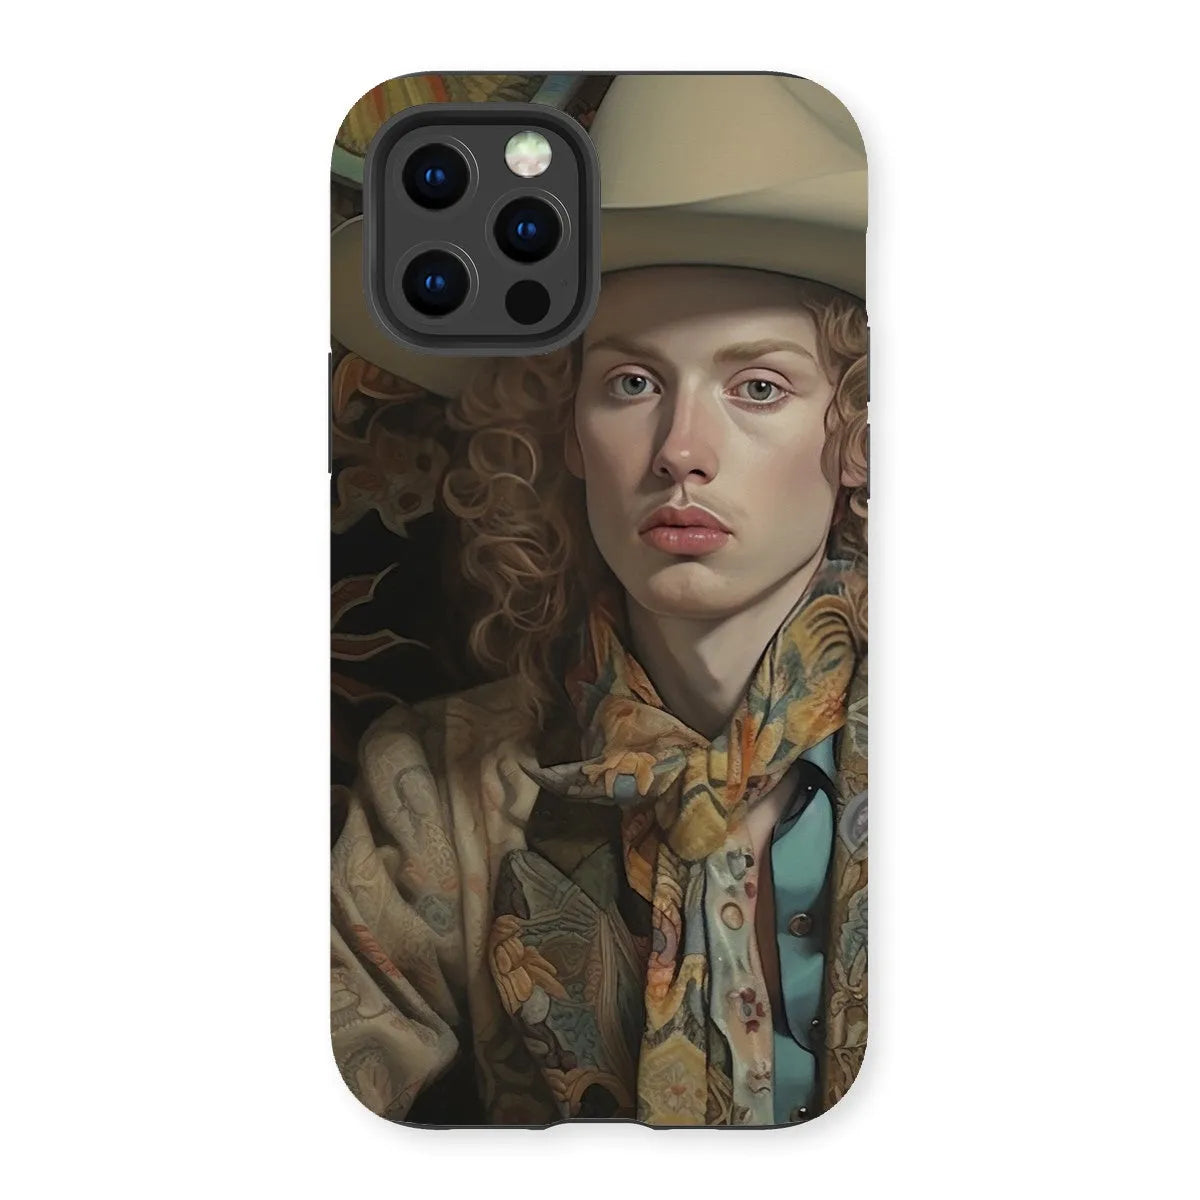 Ollie The Transgender Cowboy - F2m Dandy Outlaw Phone Case - Iphone 13 Pro / Matte - Mobile Phone Cases - Aesthetic Art